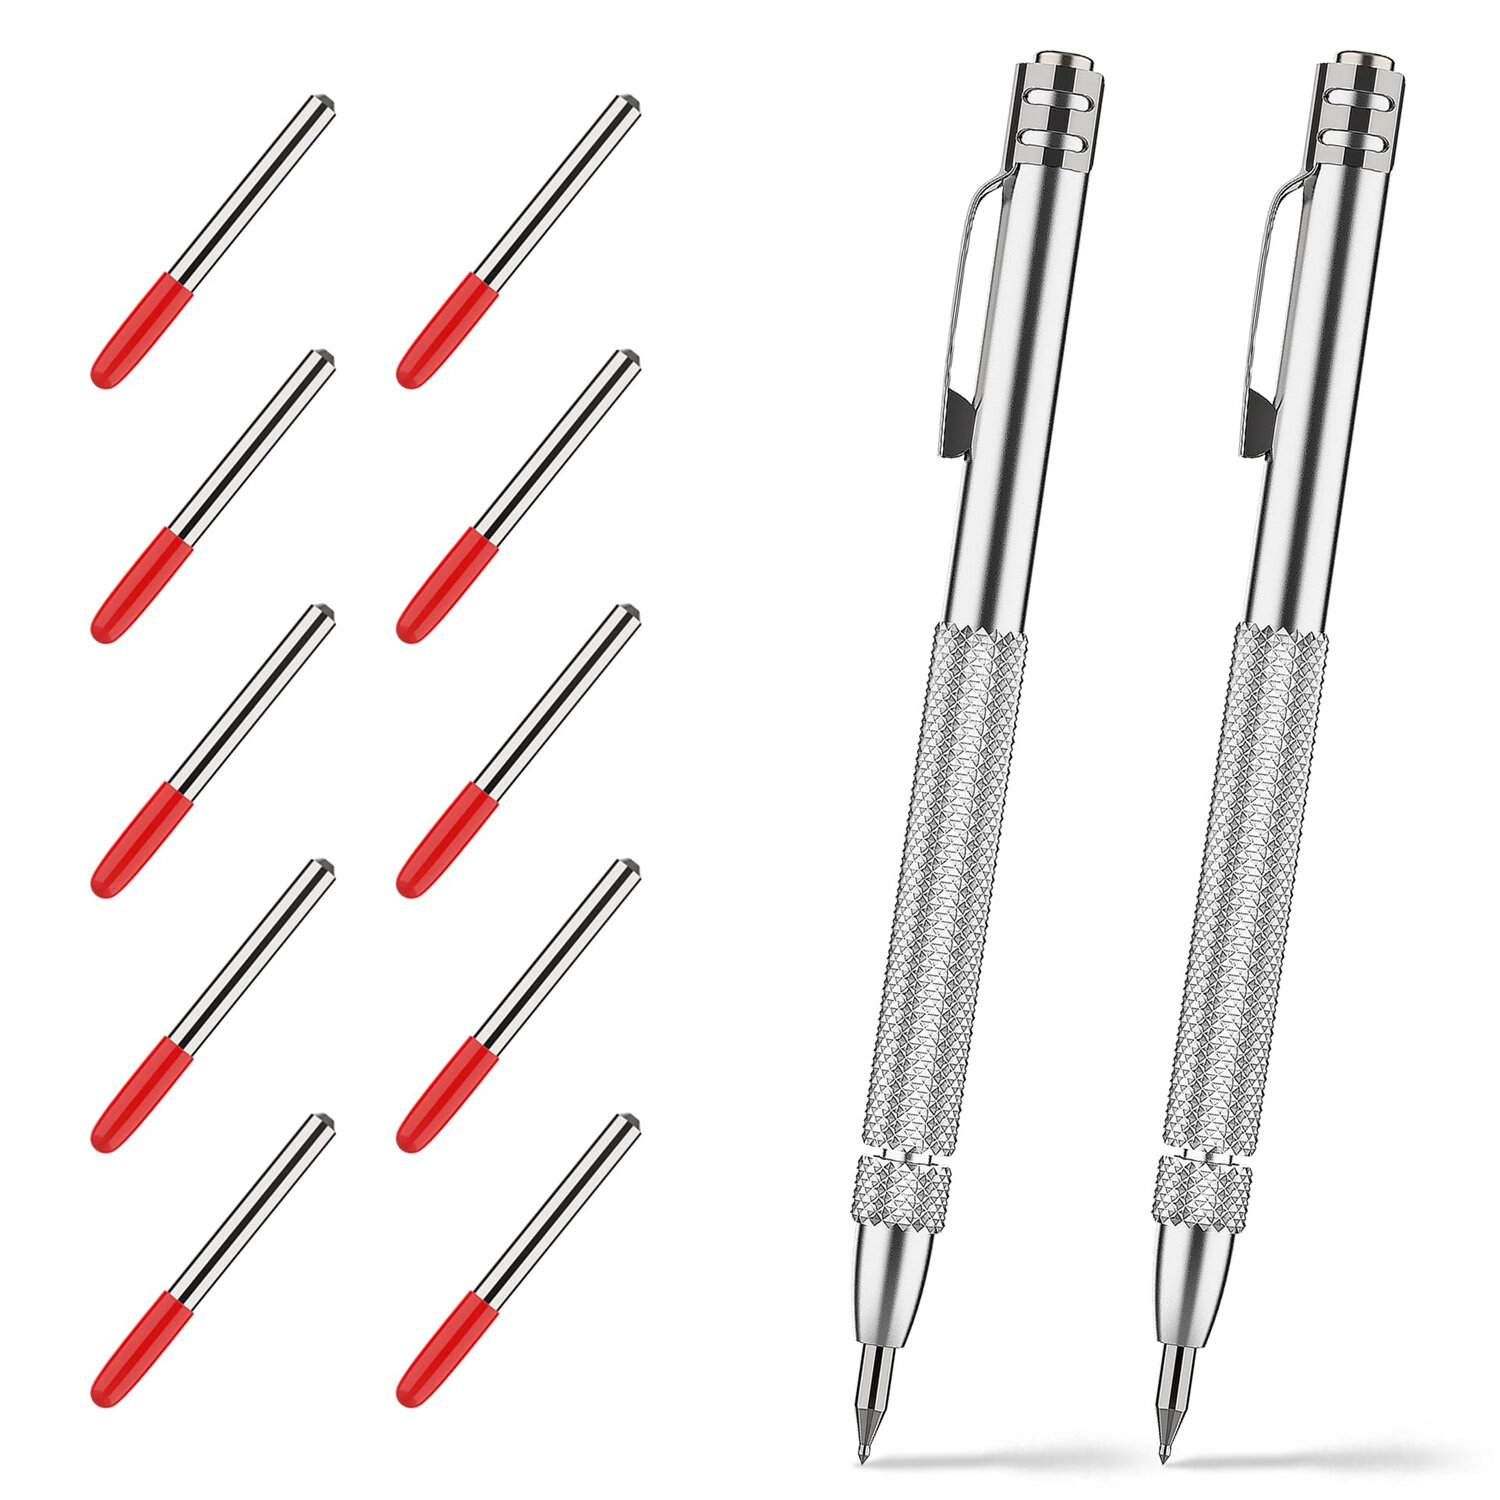 

2PCS Tungsten Carbide Scriber with Magnet Engraving Pens with 10 Replacement Marking Tips for Glass/Ceramics/Metal Sheet